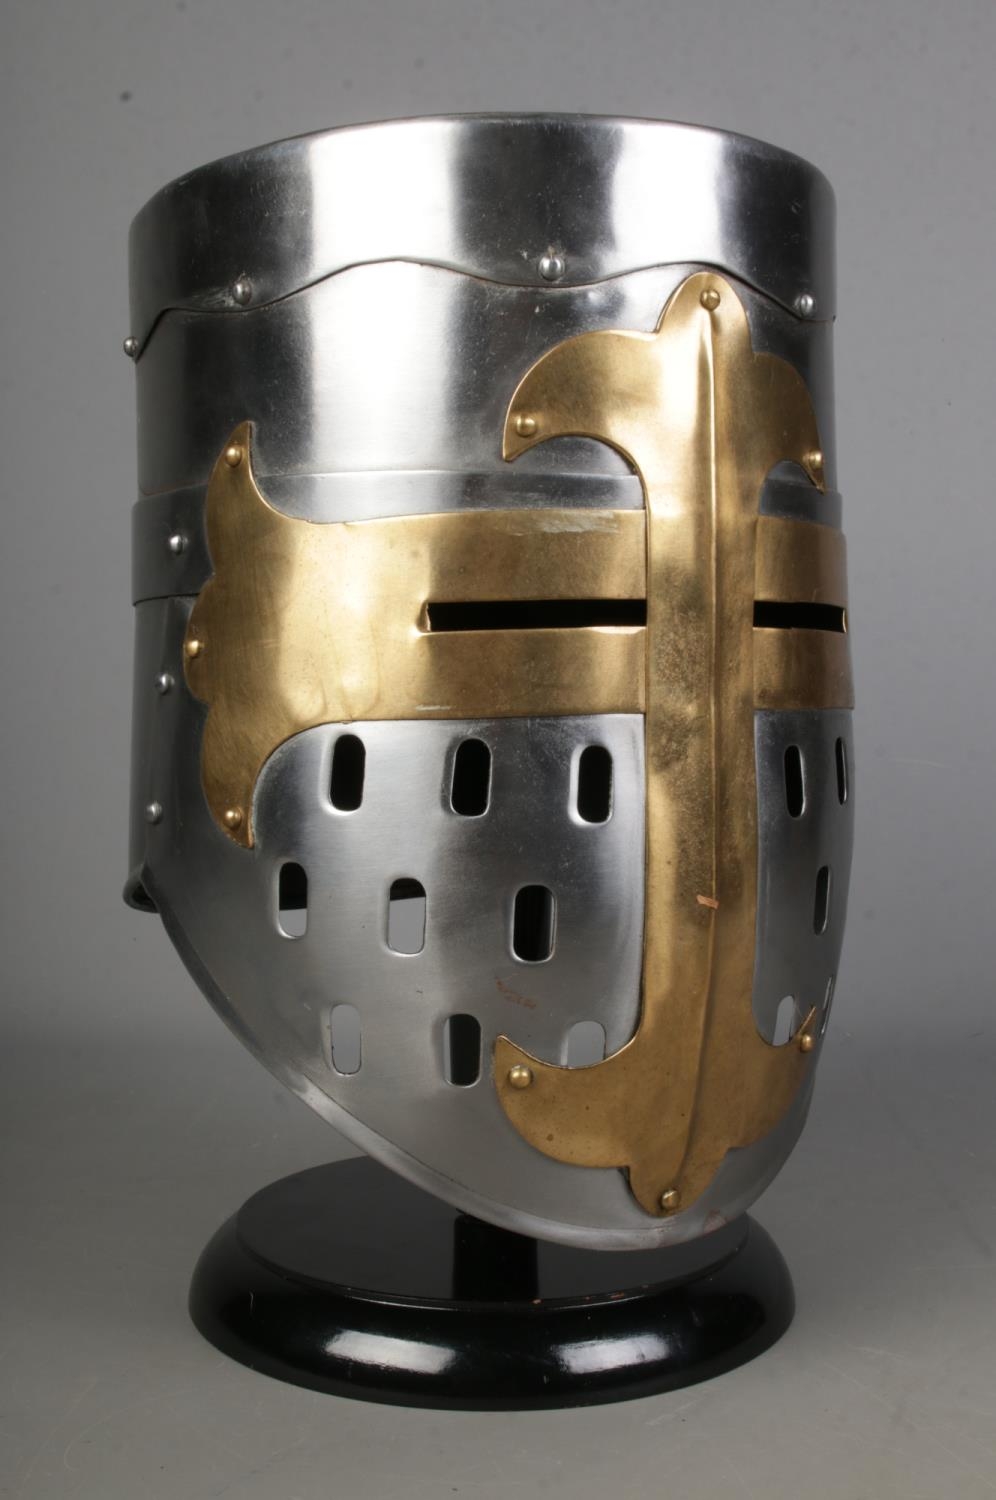 A replica medieval helmet on black display stand, life size model.